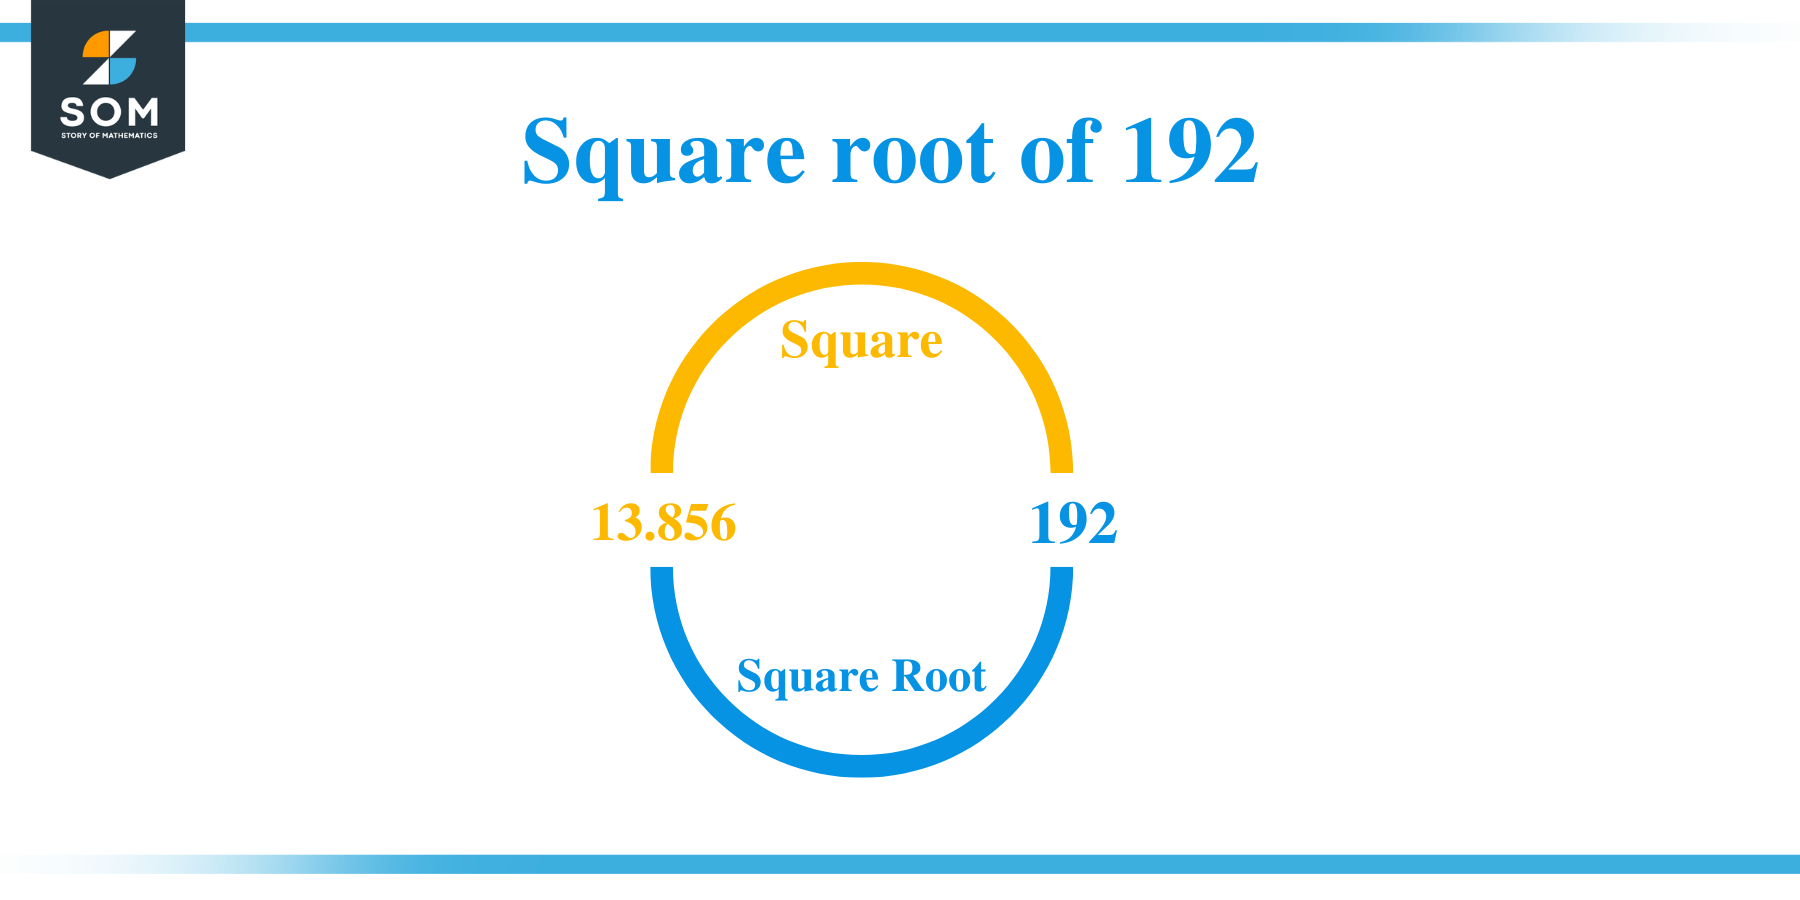 Square root of 192